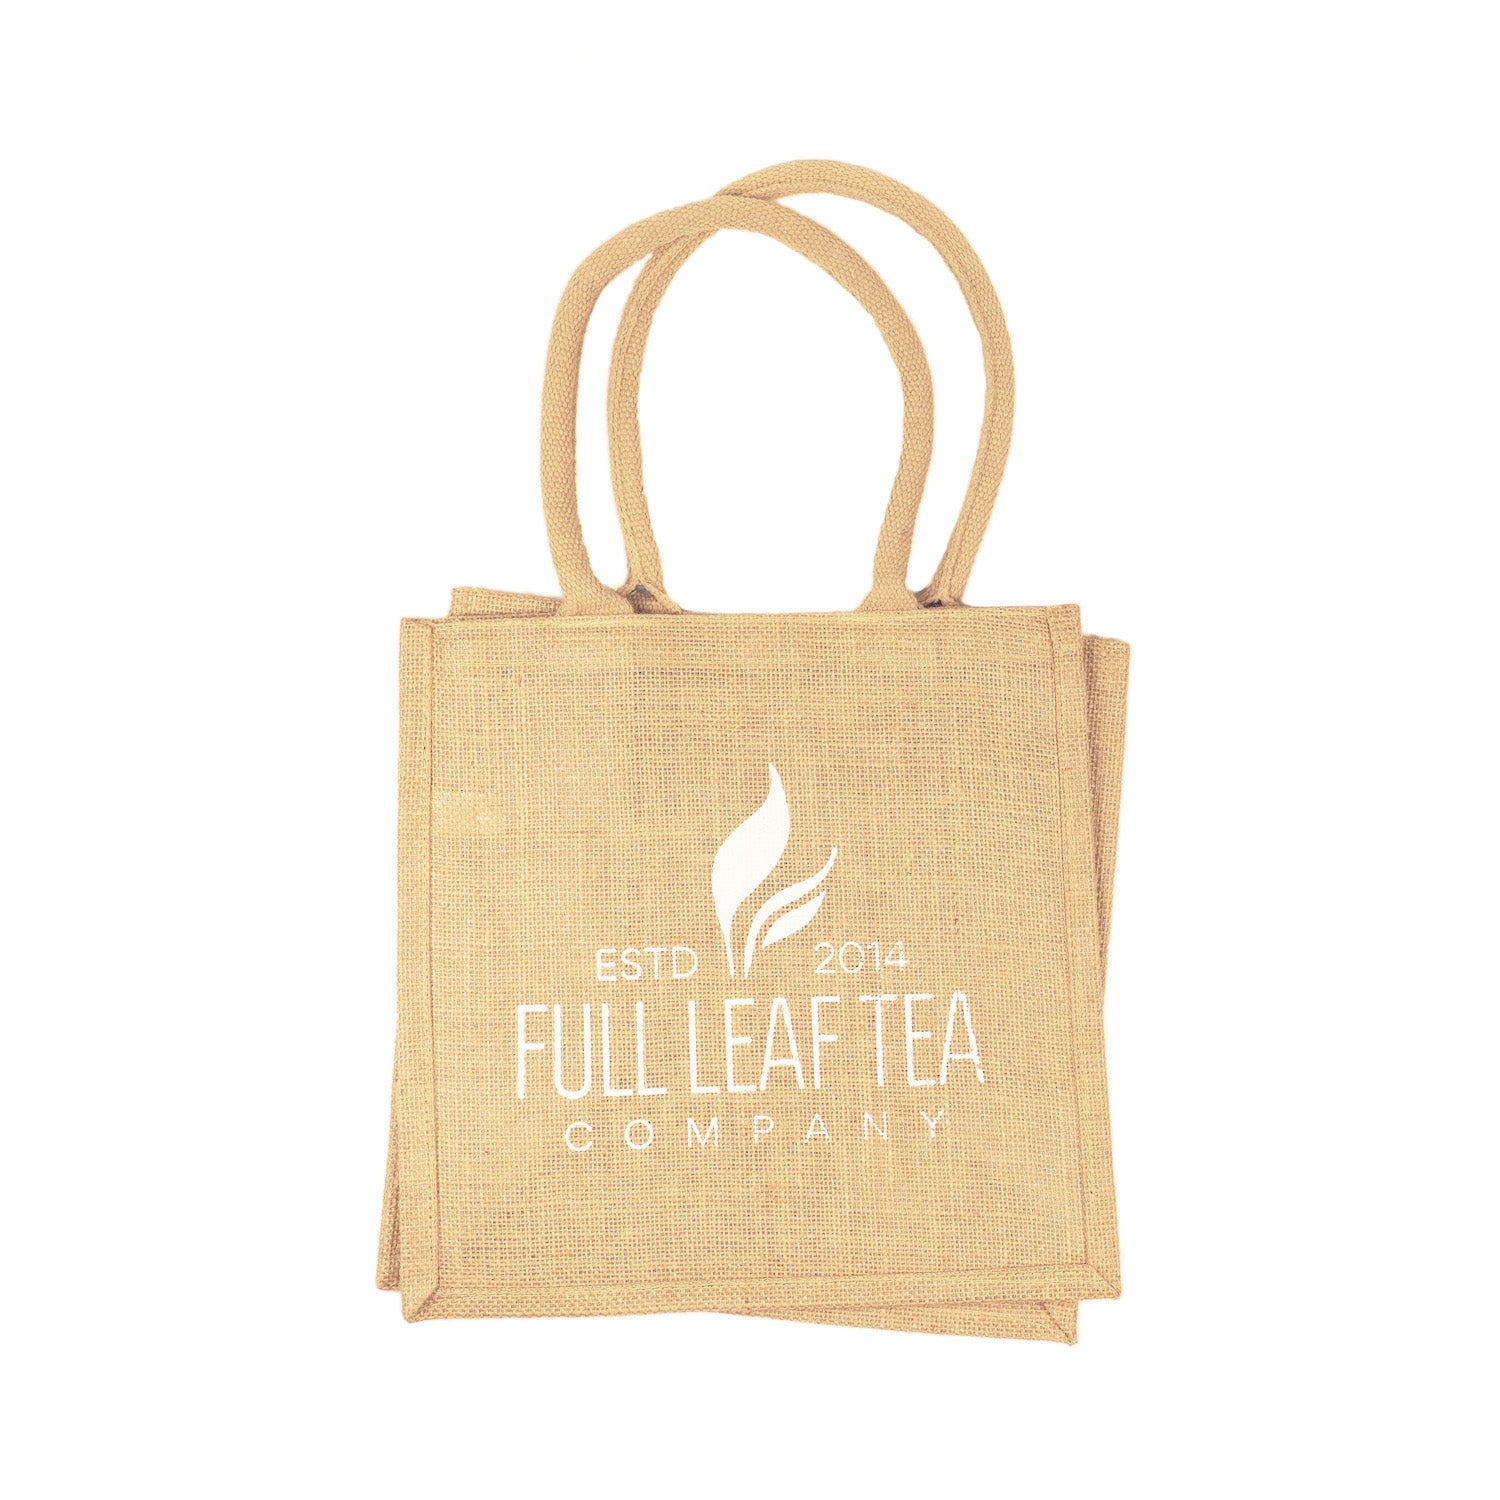 Business Brand on Small Size Tote Bag